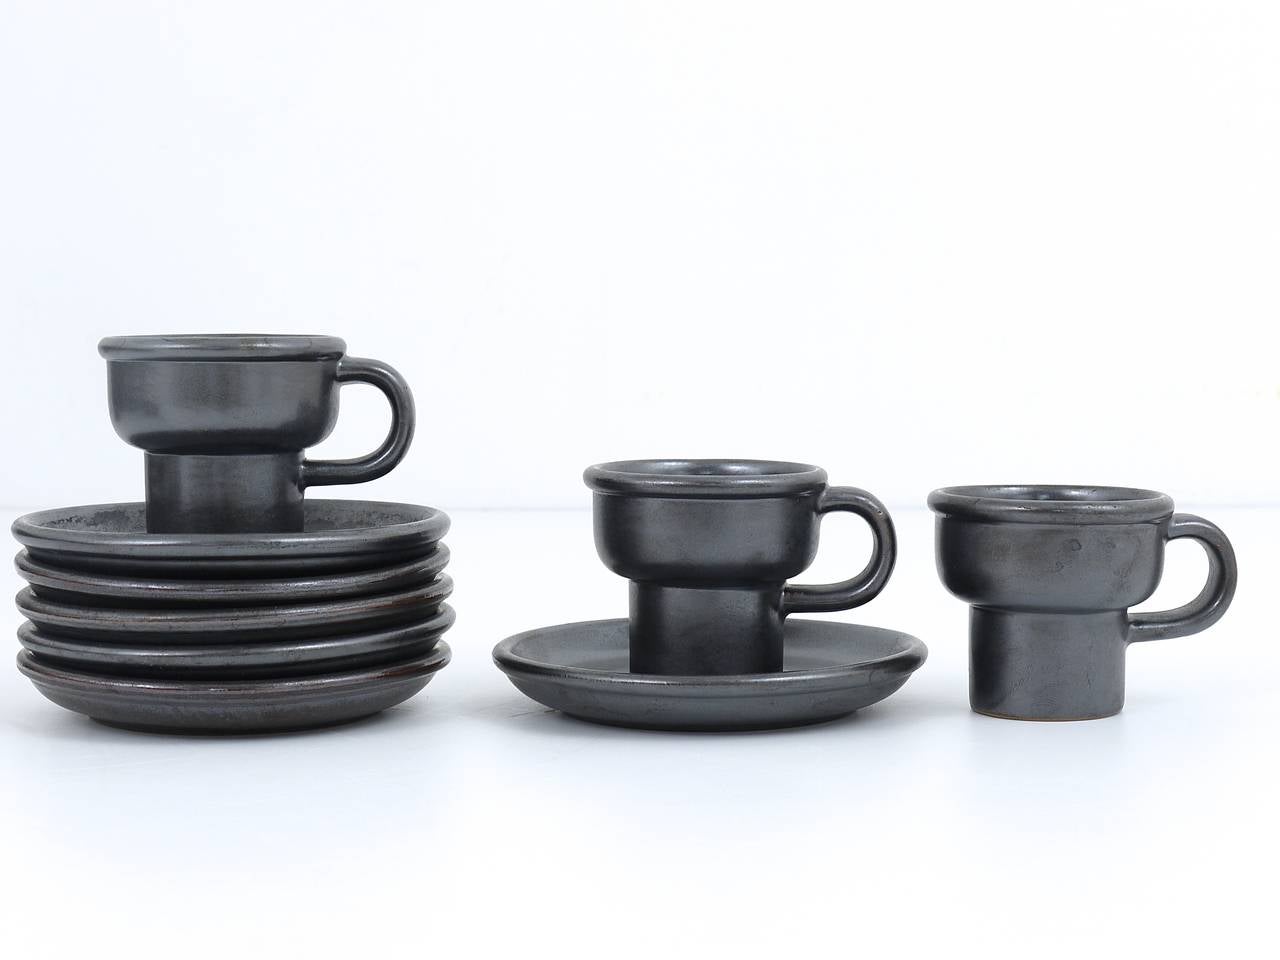 A beautiful modernist tea set, designed by Carl Auböck. Executed by Ostovics Vienna in the 1970s. Made of stoneware pottery with a fascinating grey and silver glaze. In excellent condition.

Consists of all displayed items:

Two tea pots, height 7.5